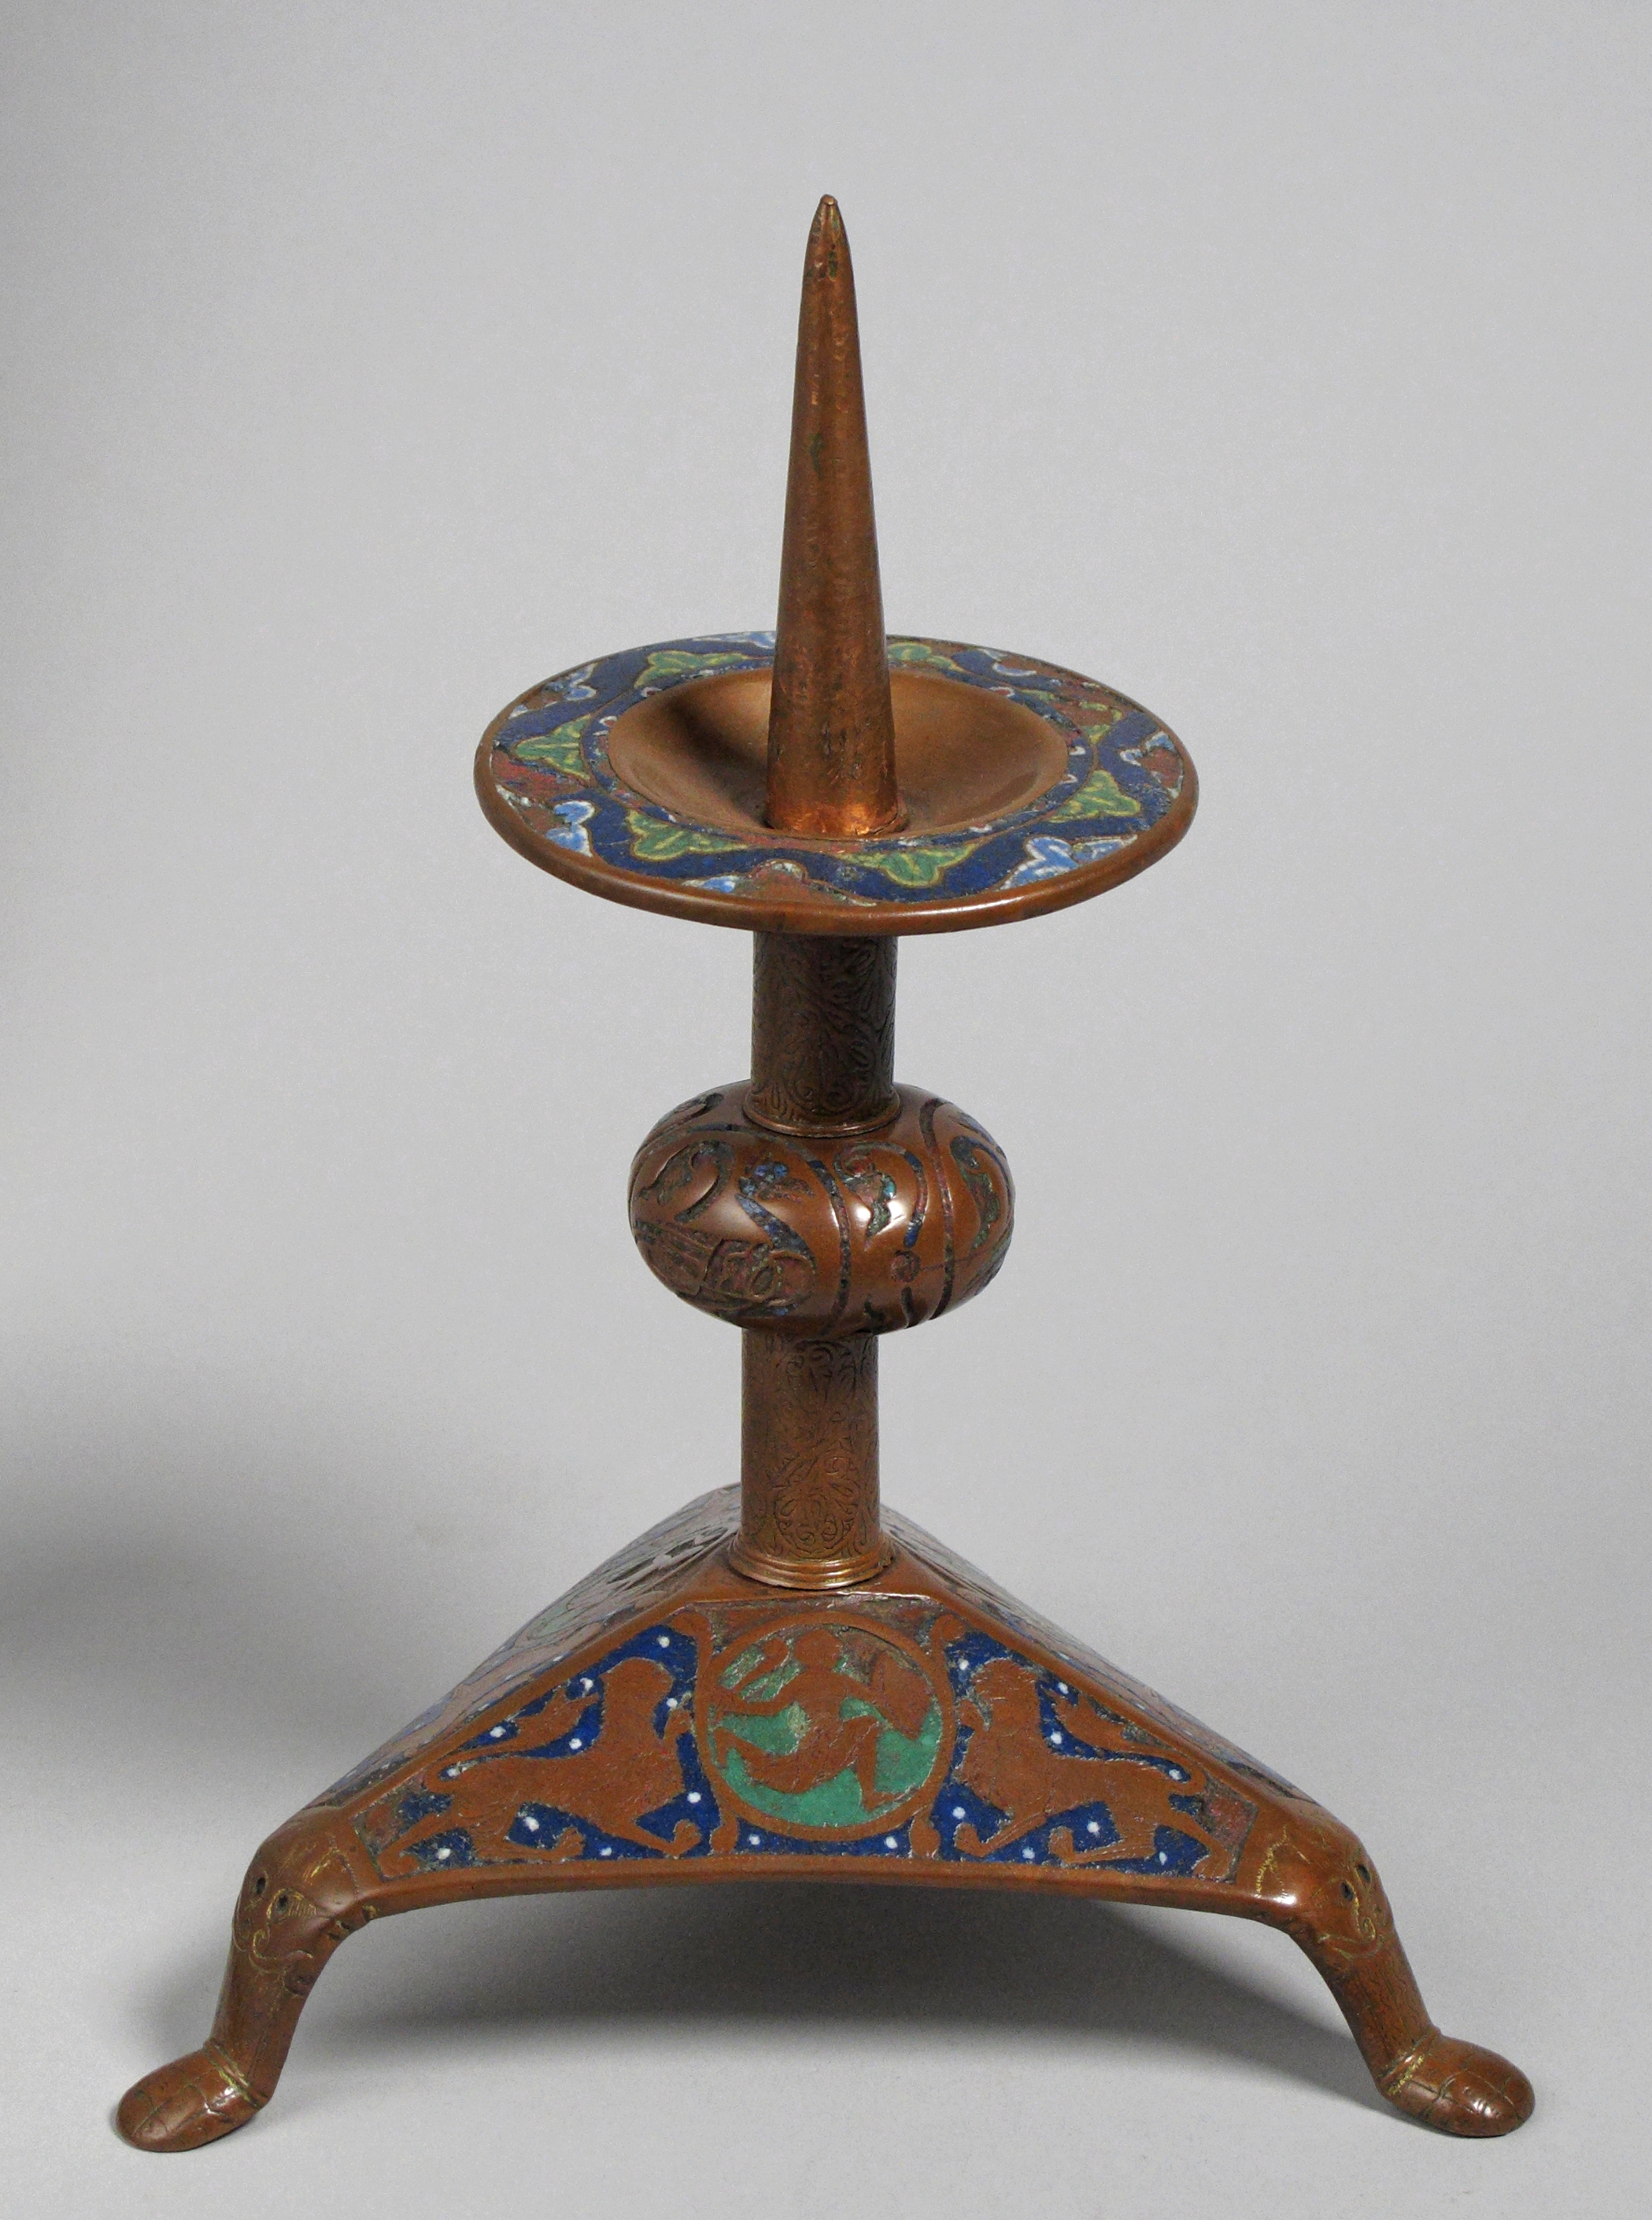 Pricket Candlestick (one of a pair), French